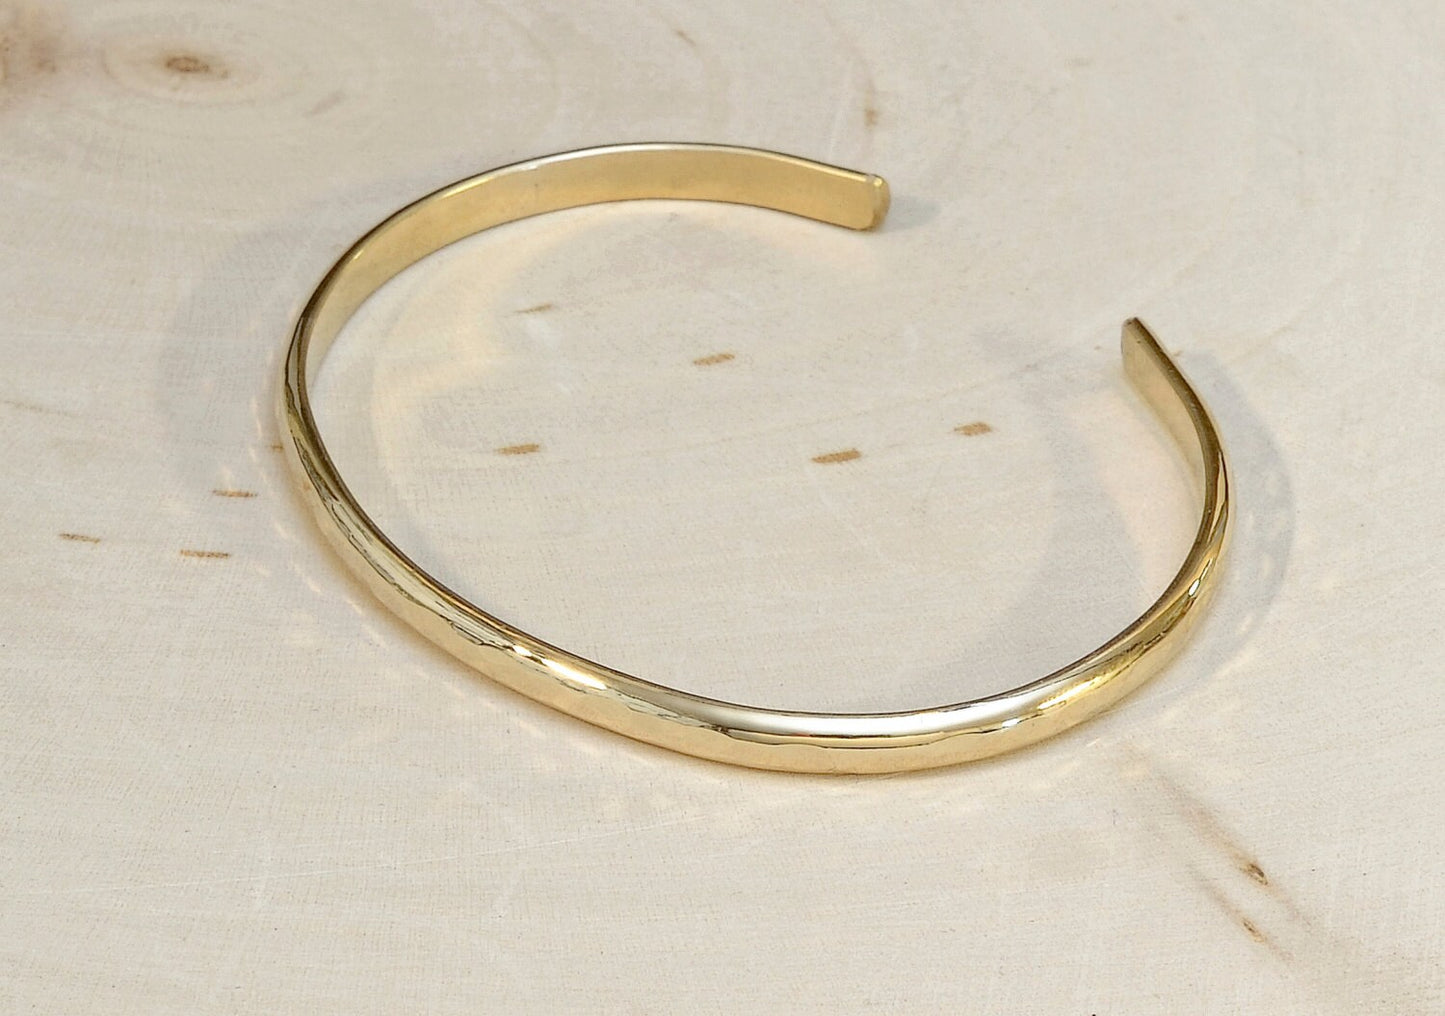 14k Gold hammered sleek cuff bracelet with mirror finish and dainty styling